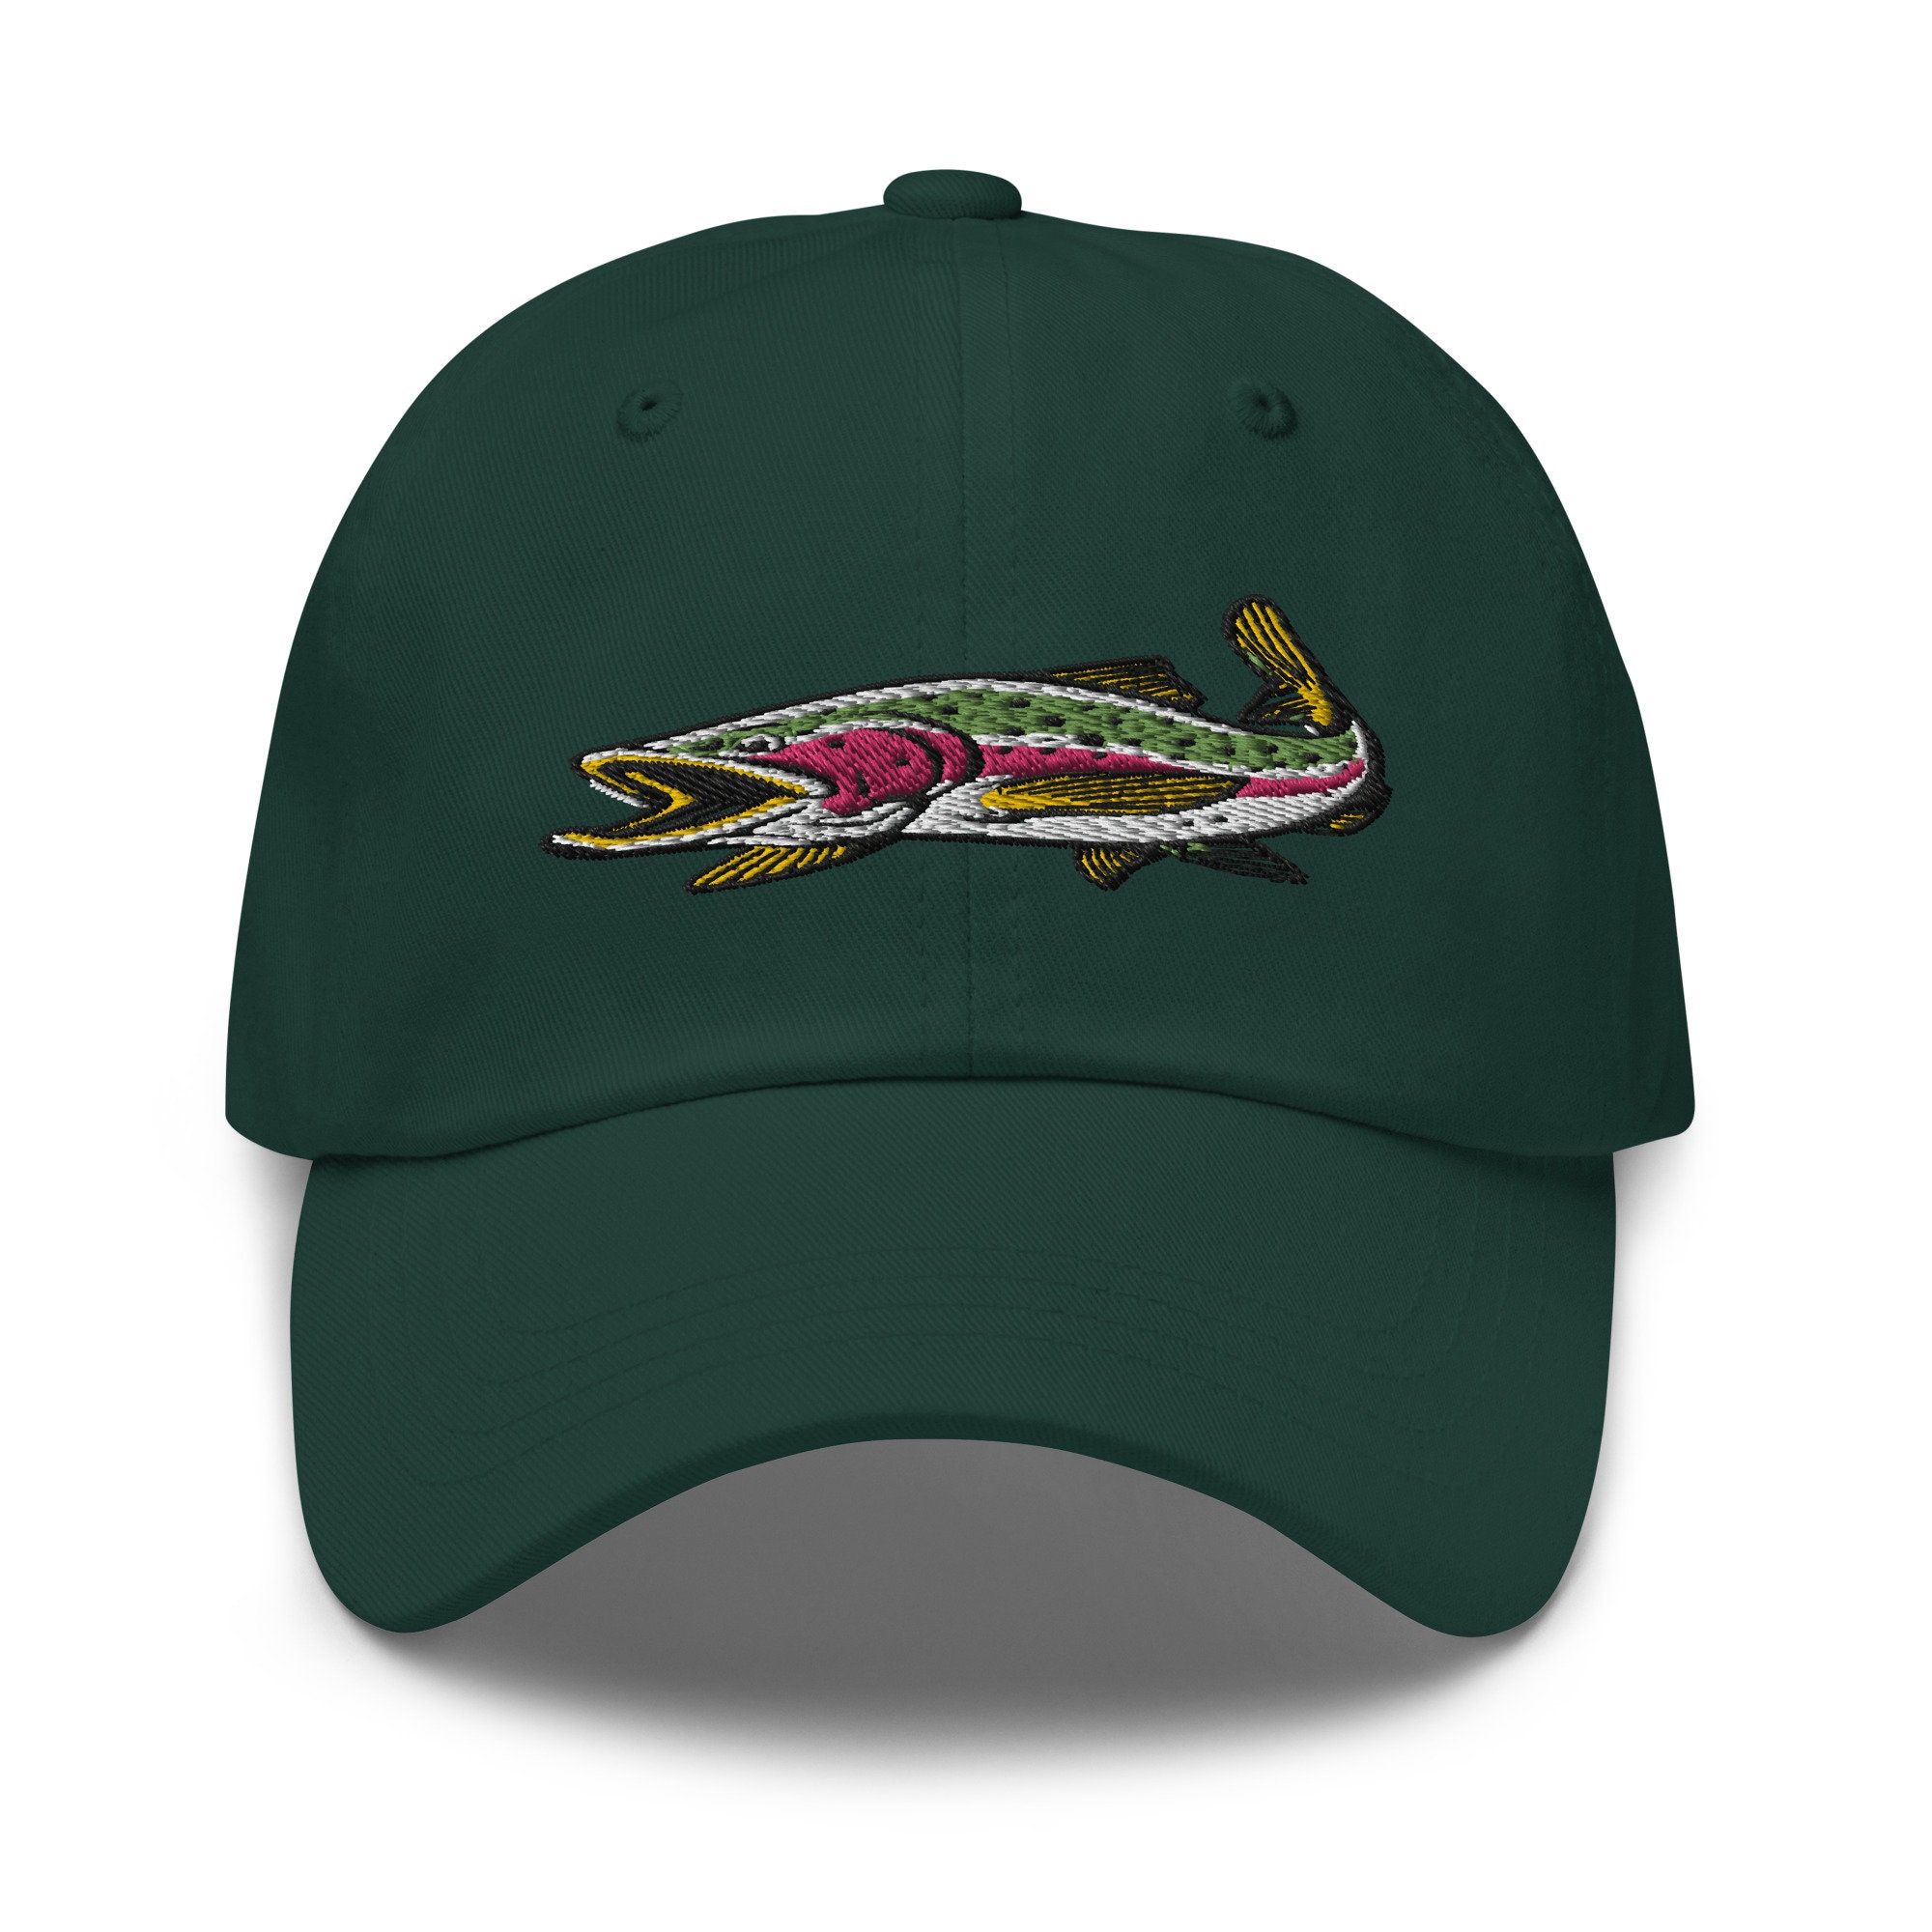 Trout Embroidered Hat, Mom Cap, Wildlife Cap, Animal, Fish, Rainbow Trout,  Fishing, Fisherman Hat, Adjustable Cap Gift Multiple Colors -  Canada